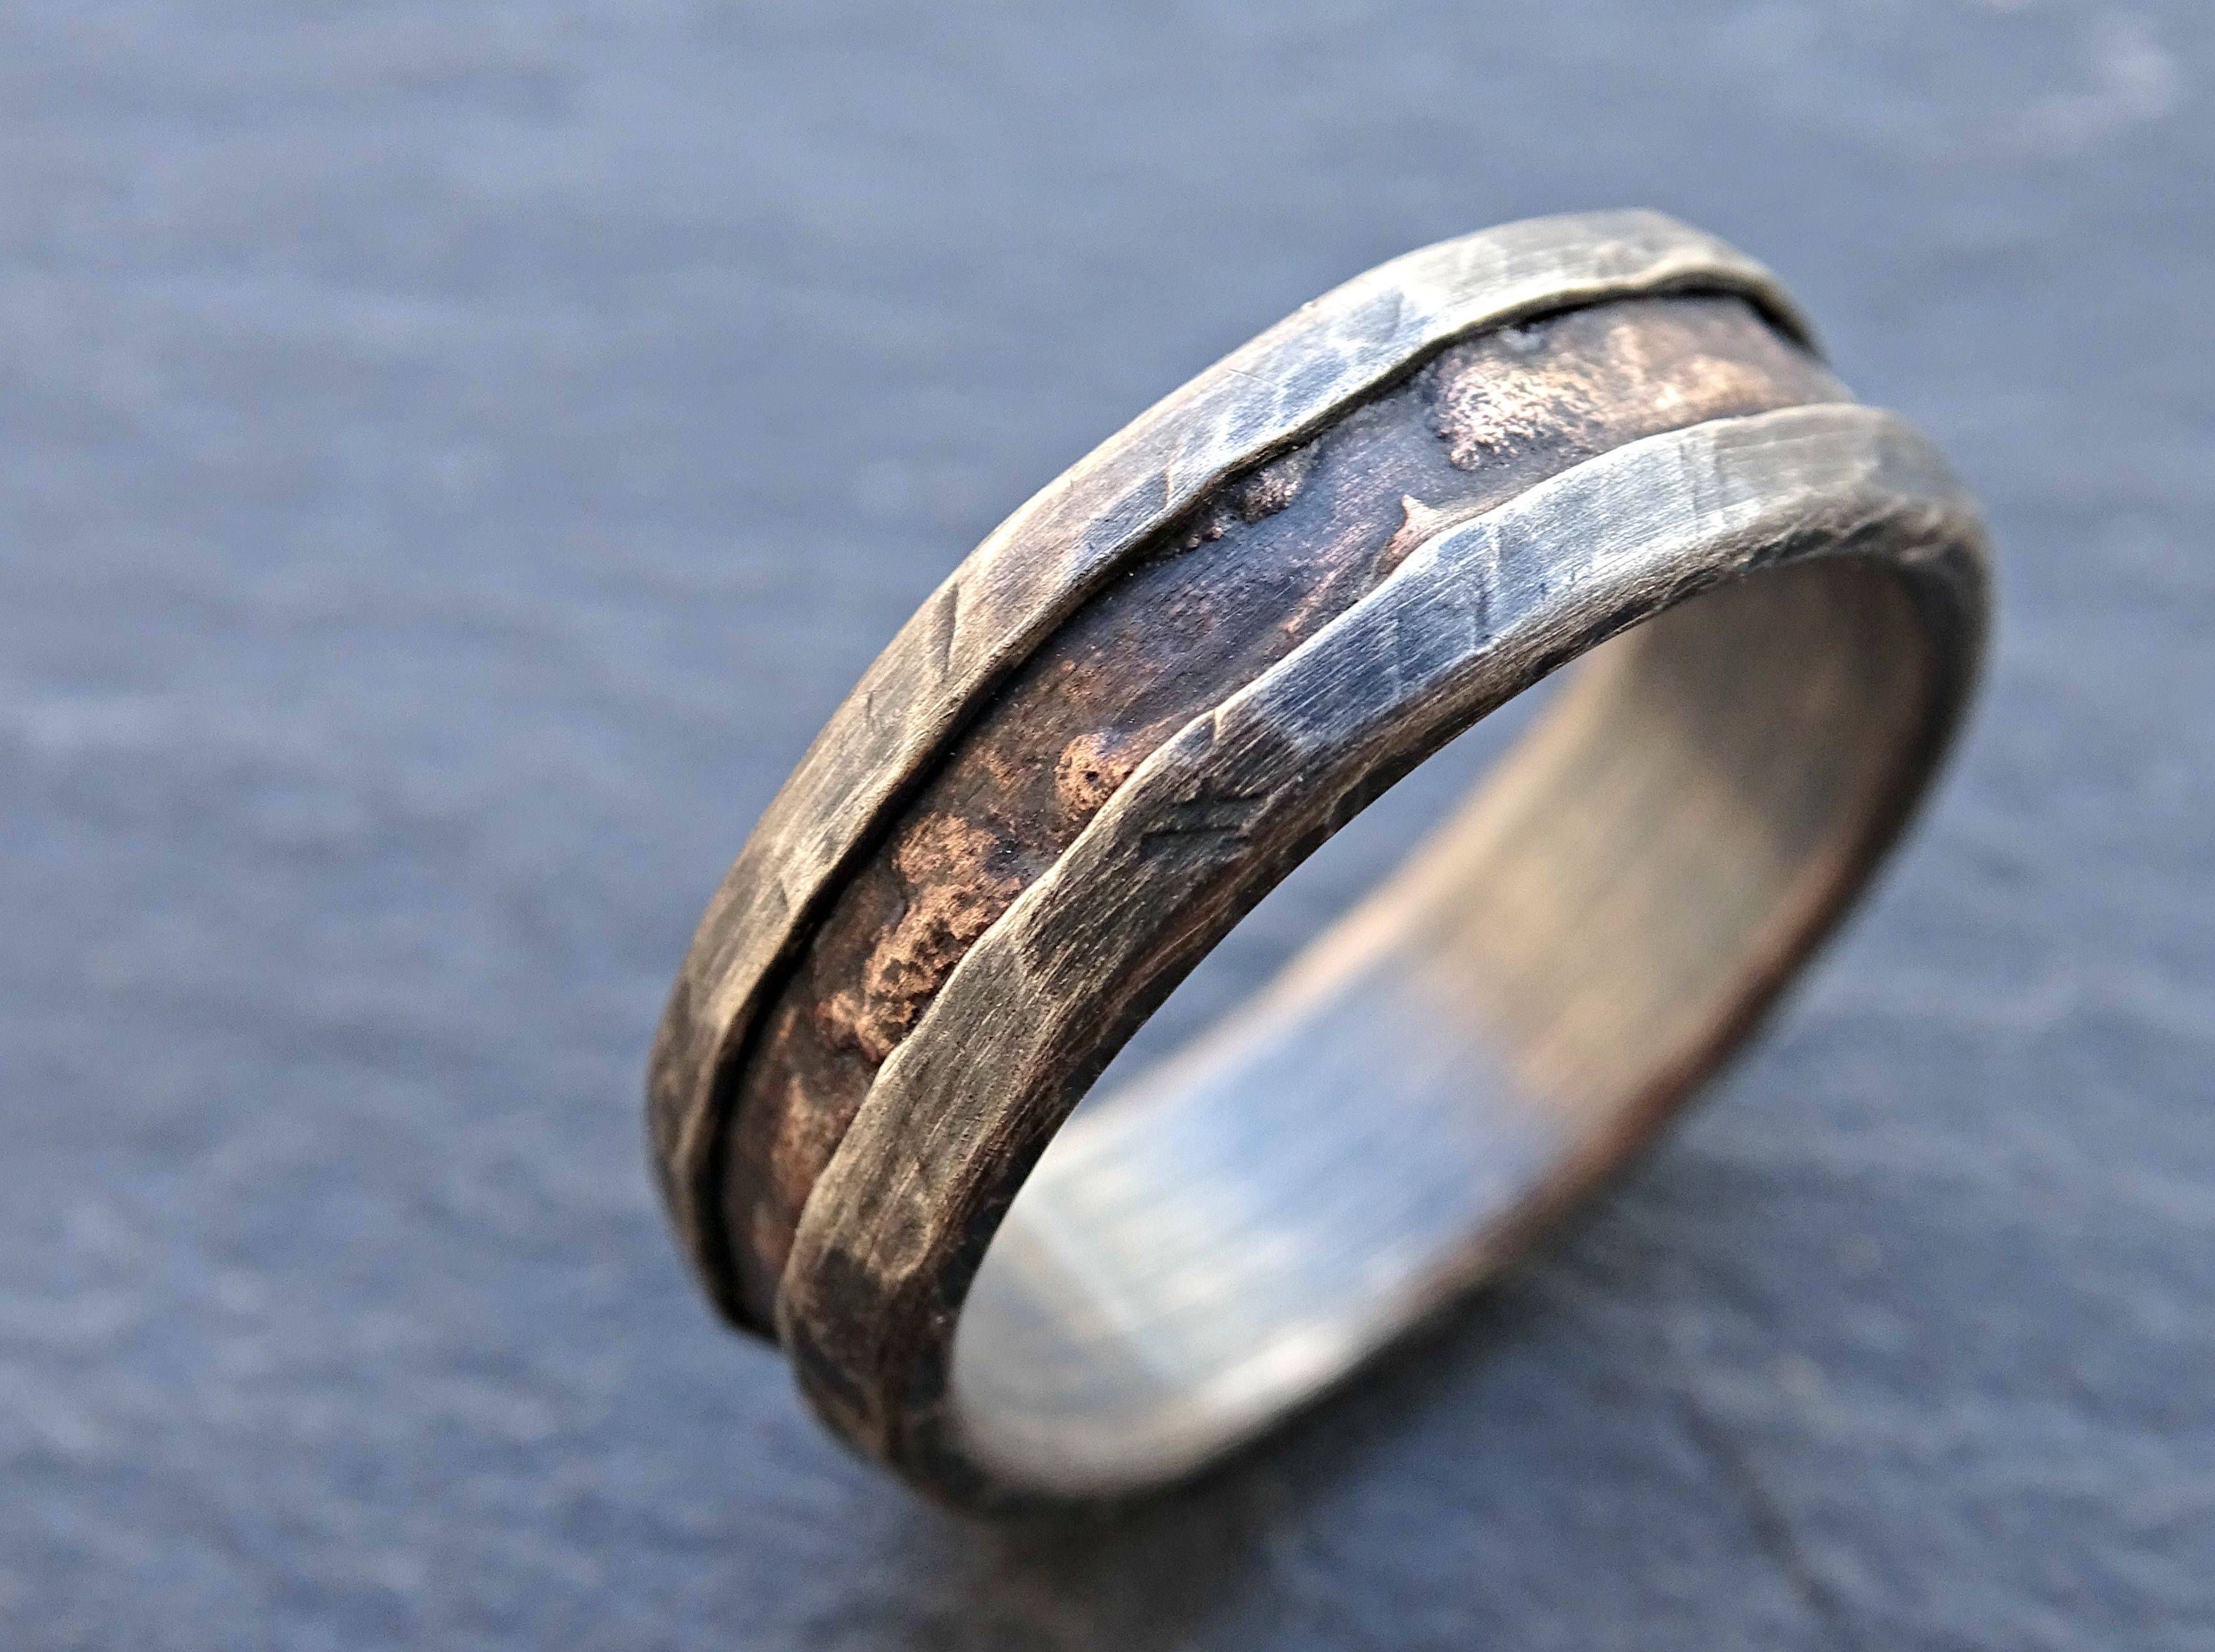 Buy A Hand Made Cool Mens Ring, Alternative Wedding Band Rugged Intended For Wood Grain Men's Wedding Bands (View 4 of 15)